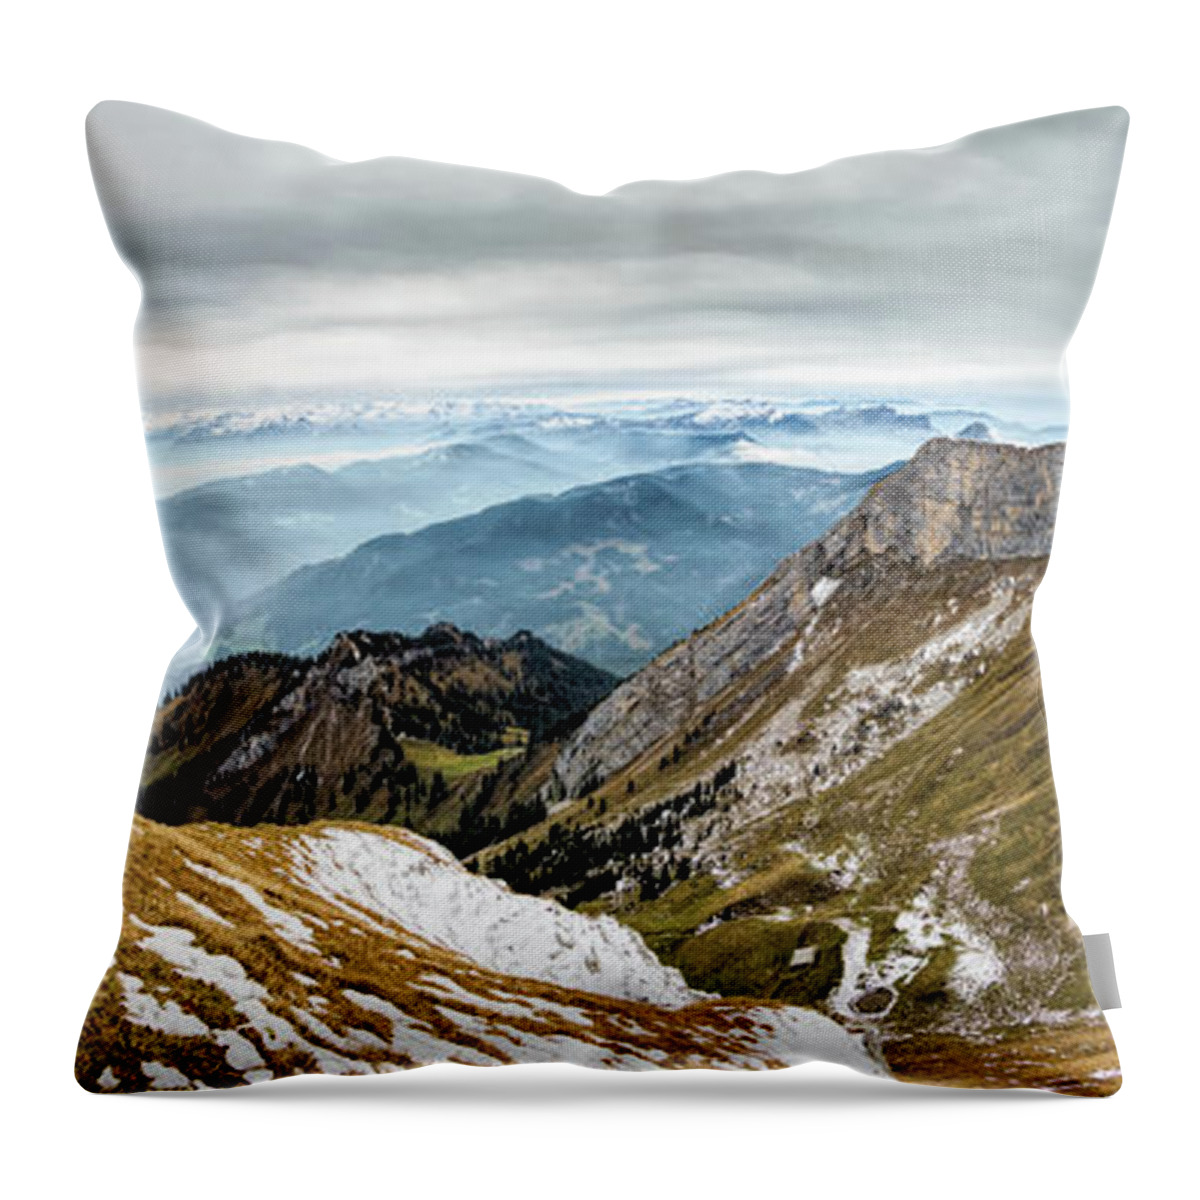 Panorama Throw Pillow featuring the photograph Mountain Landscape by Rick Deacon